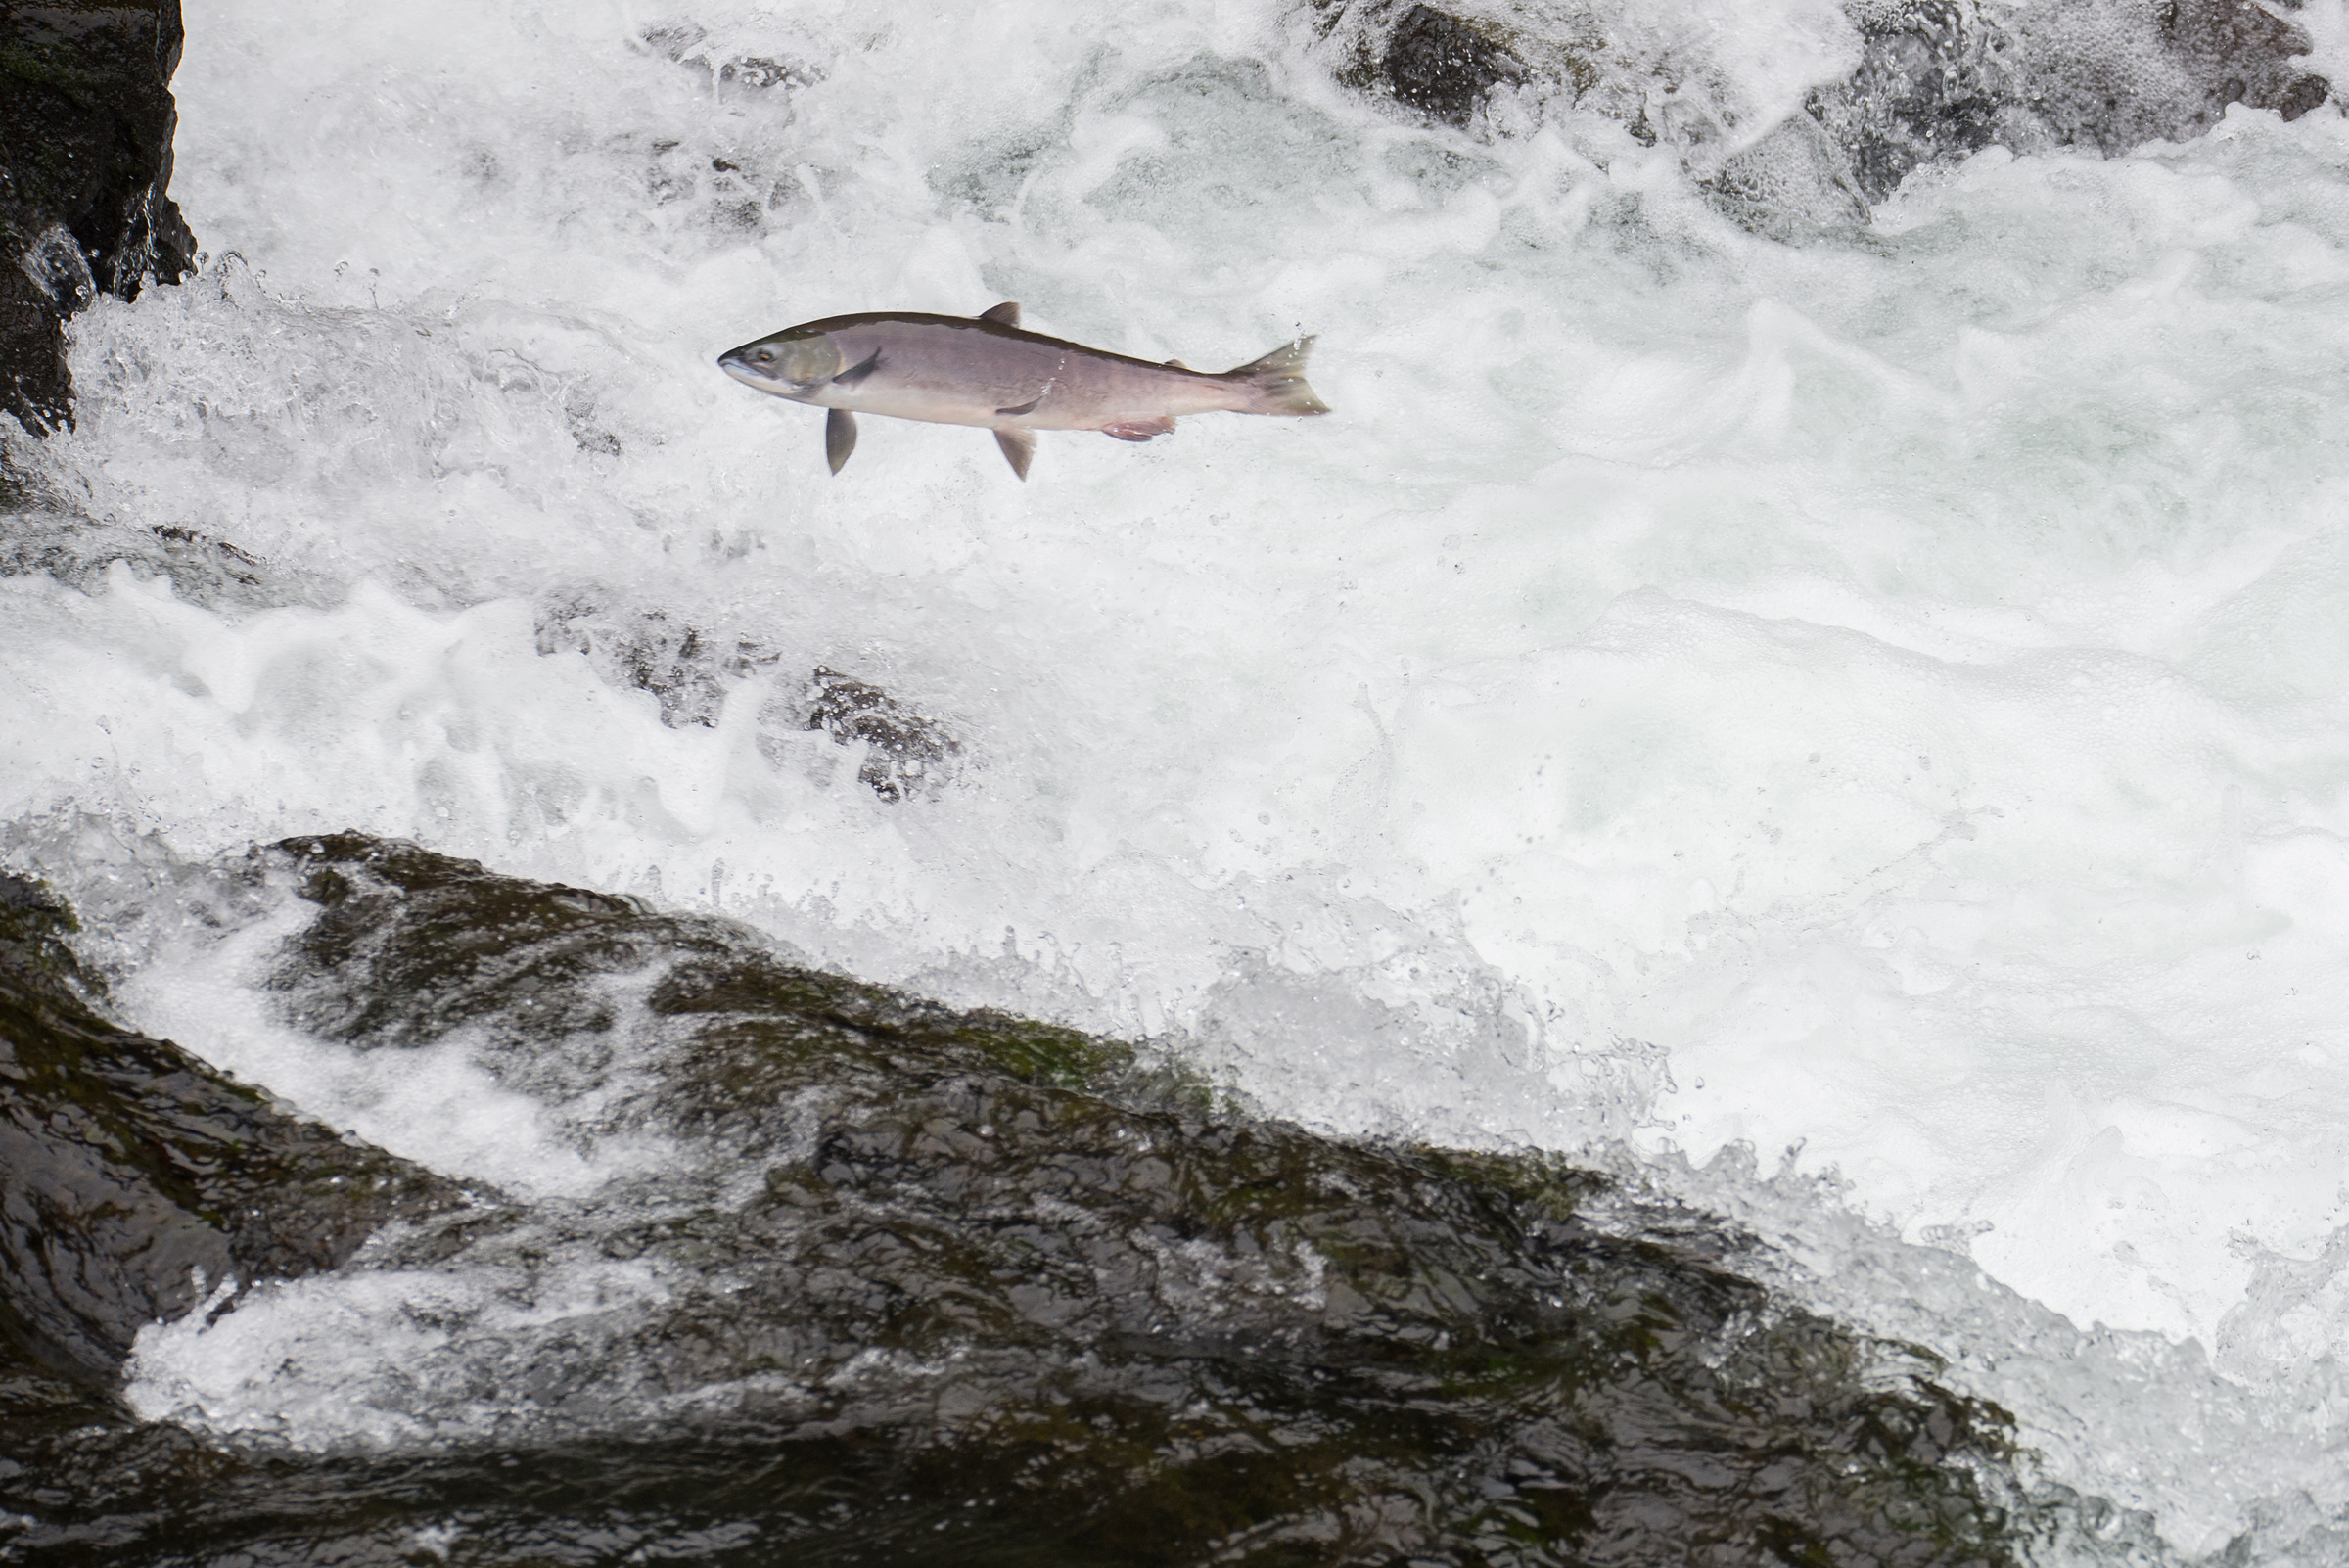 Pacific Salmon jumping in Alaska, United States